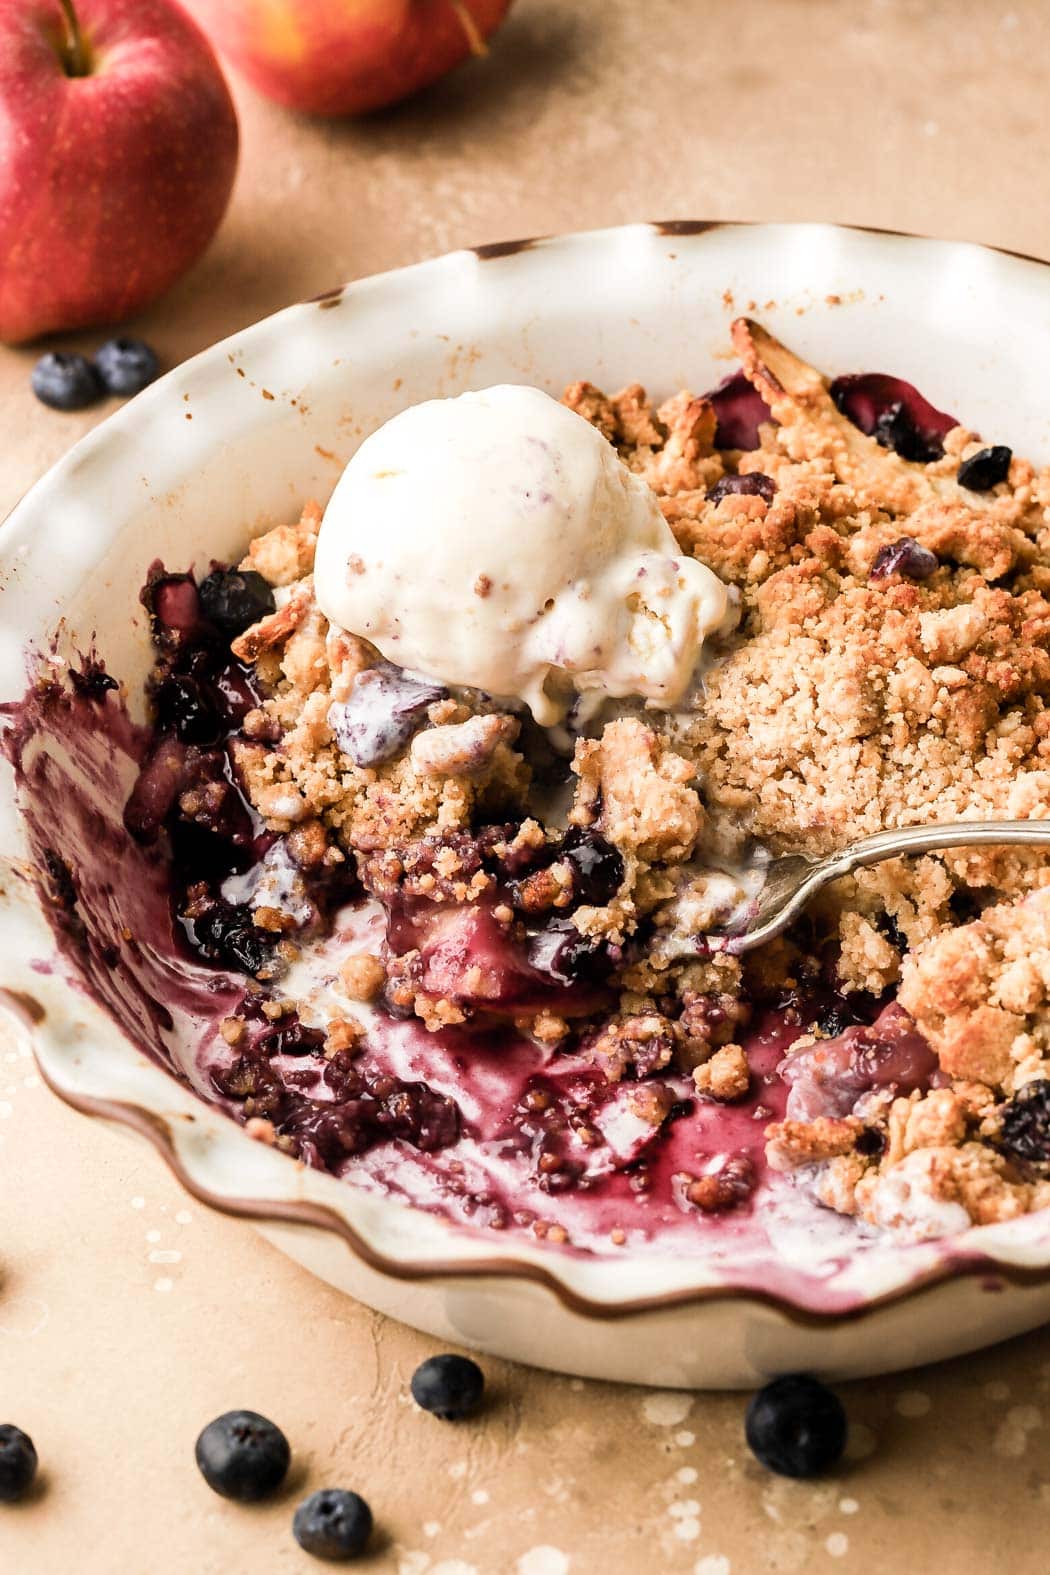 blueberry and apple crumble